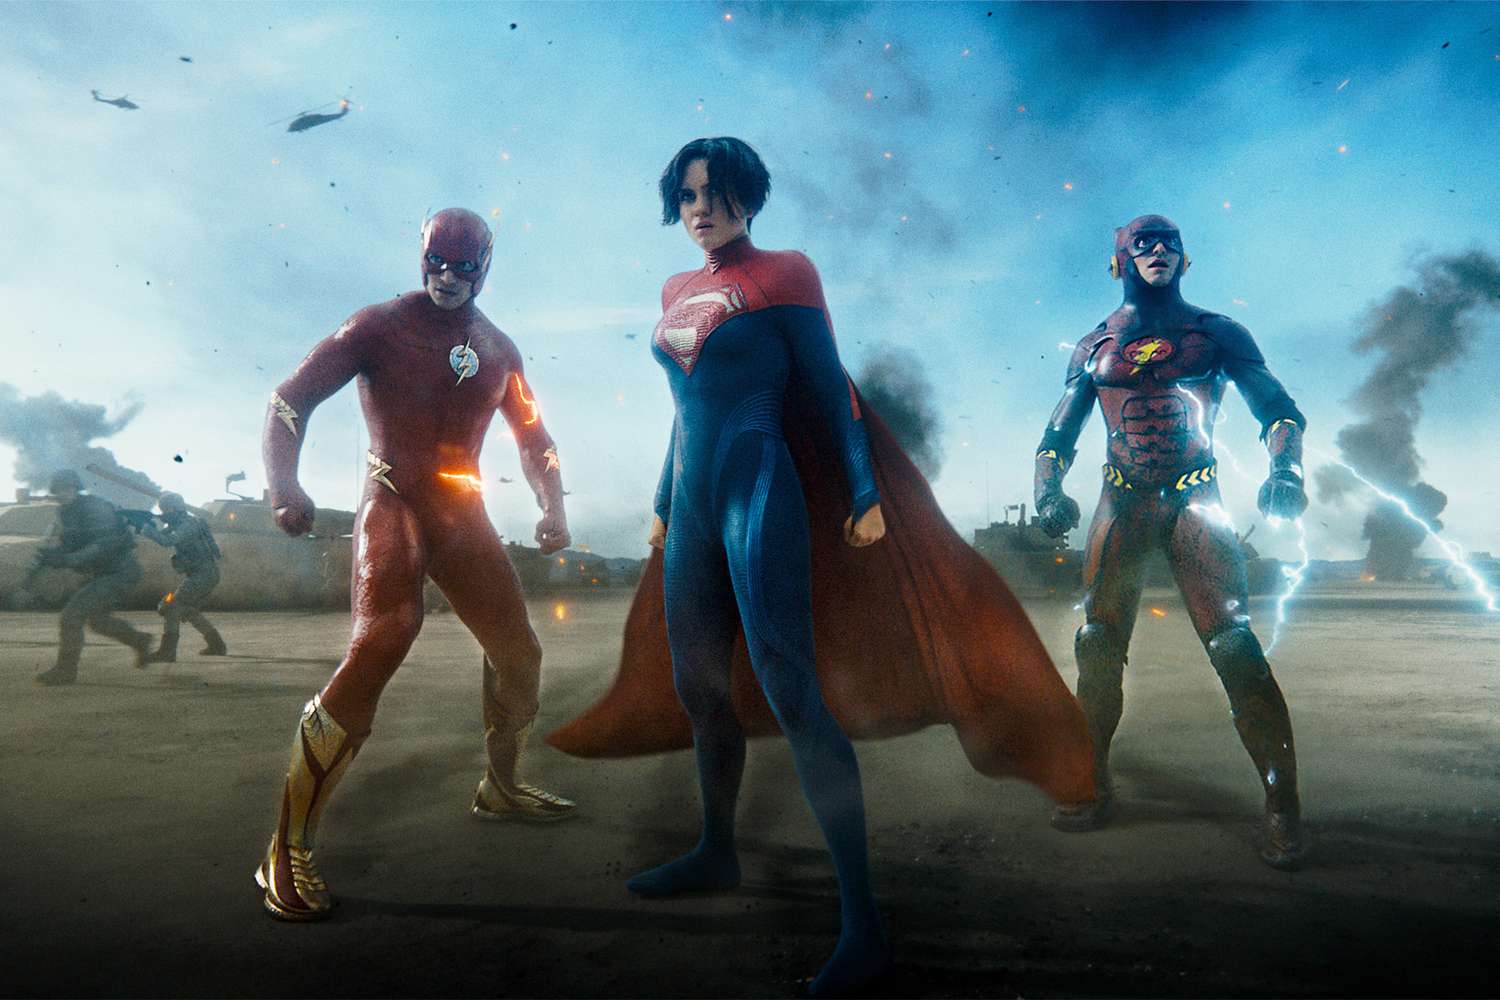 THE FLASH (L-R) EZRA MILLER as Barry Allen/The Flash, SASHA CALLE as Kara Zor-El/Supergirl and EZRA MILLER as Barry Allen/The Flash in Warner Bros. Pictures’ action adventure “THE FLASH,”